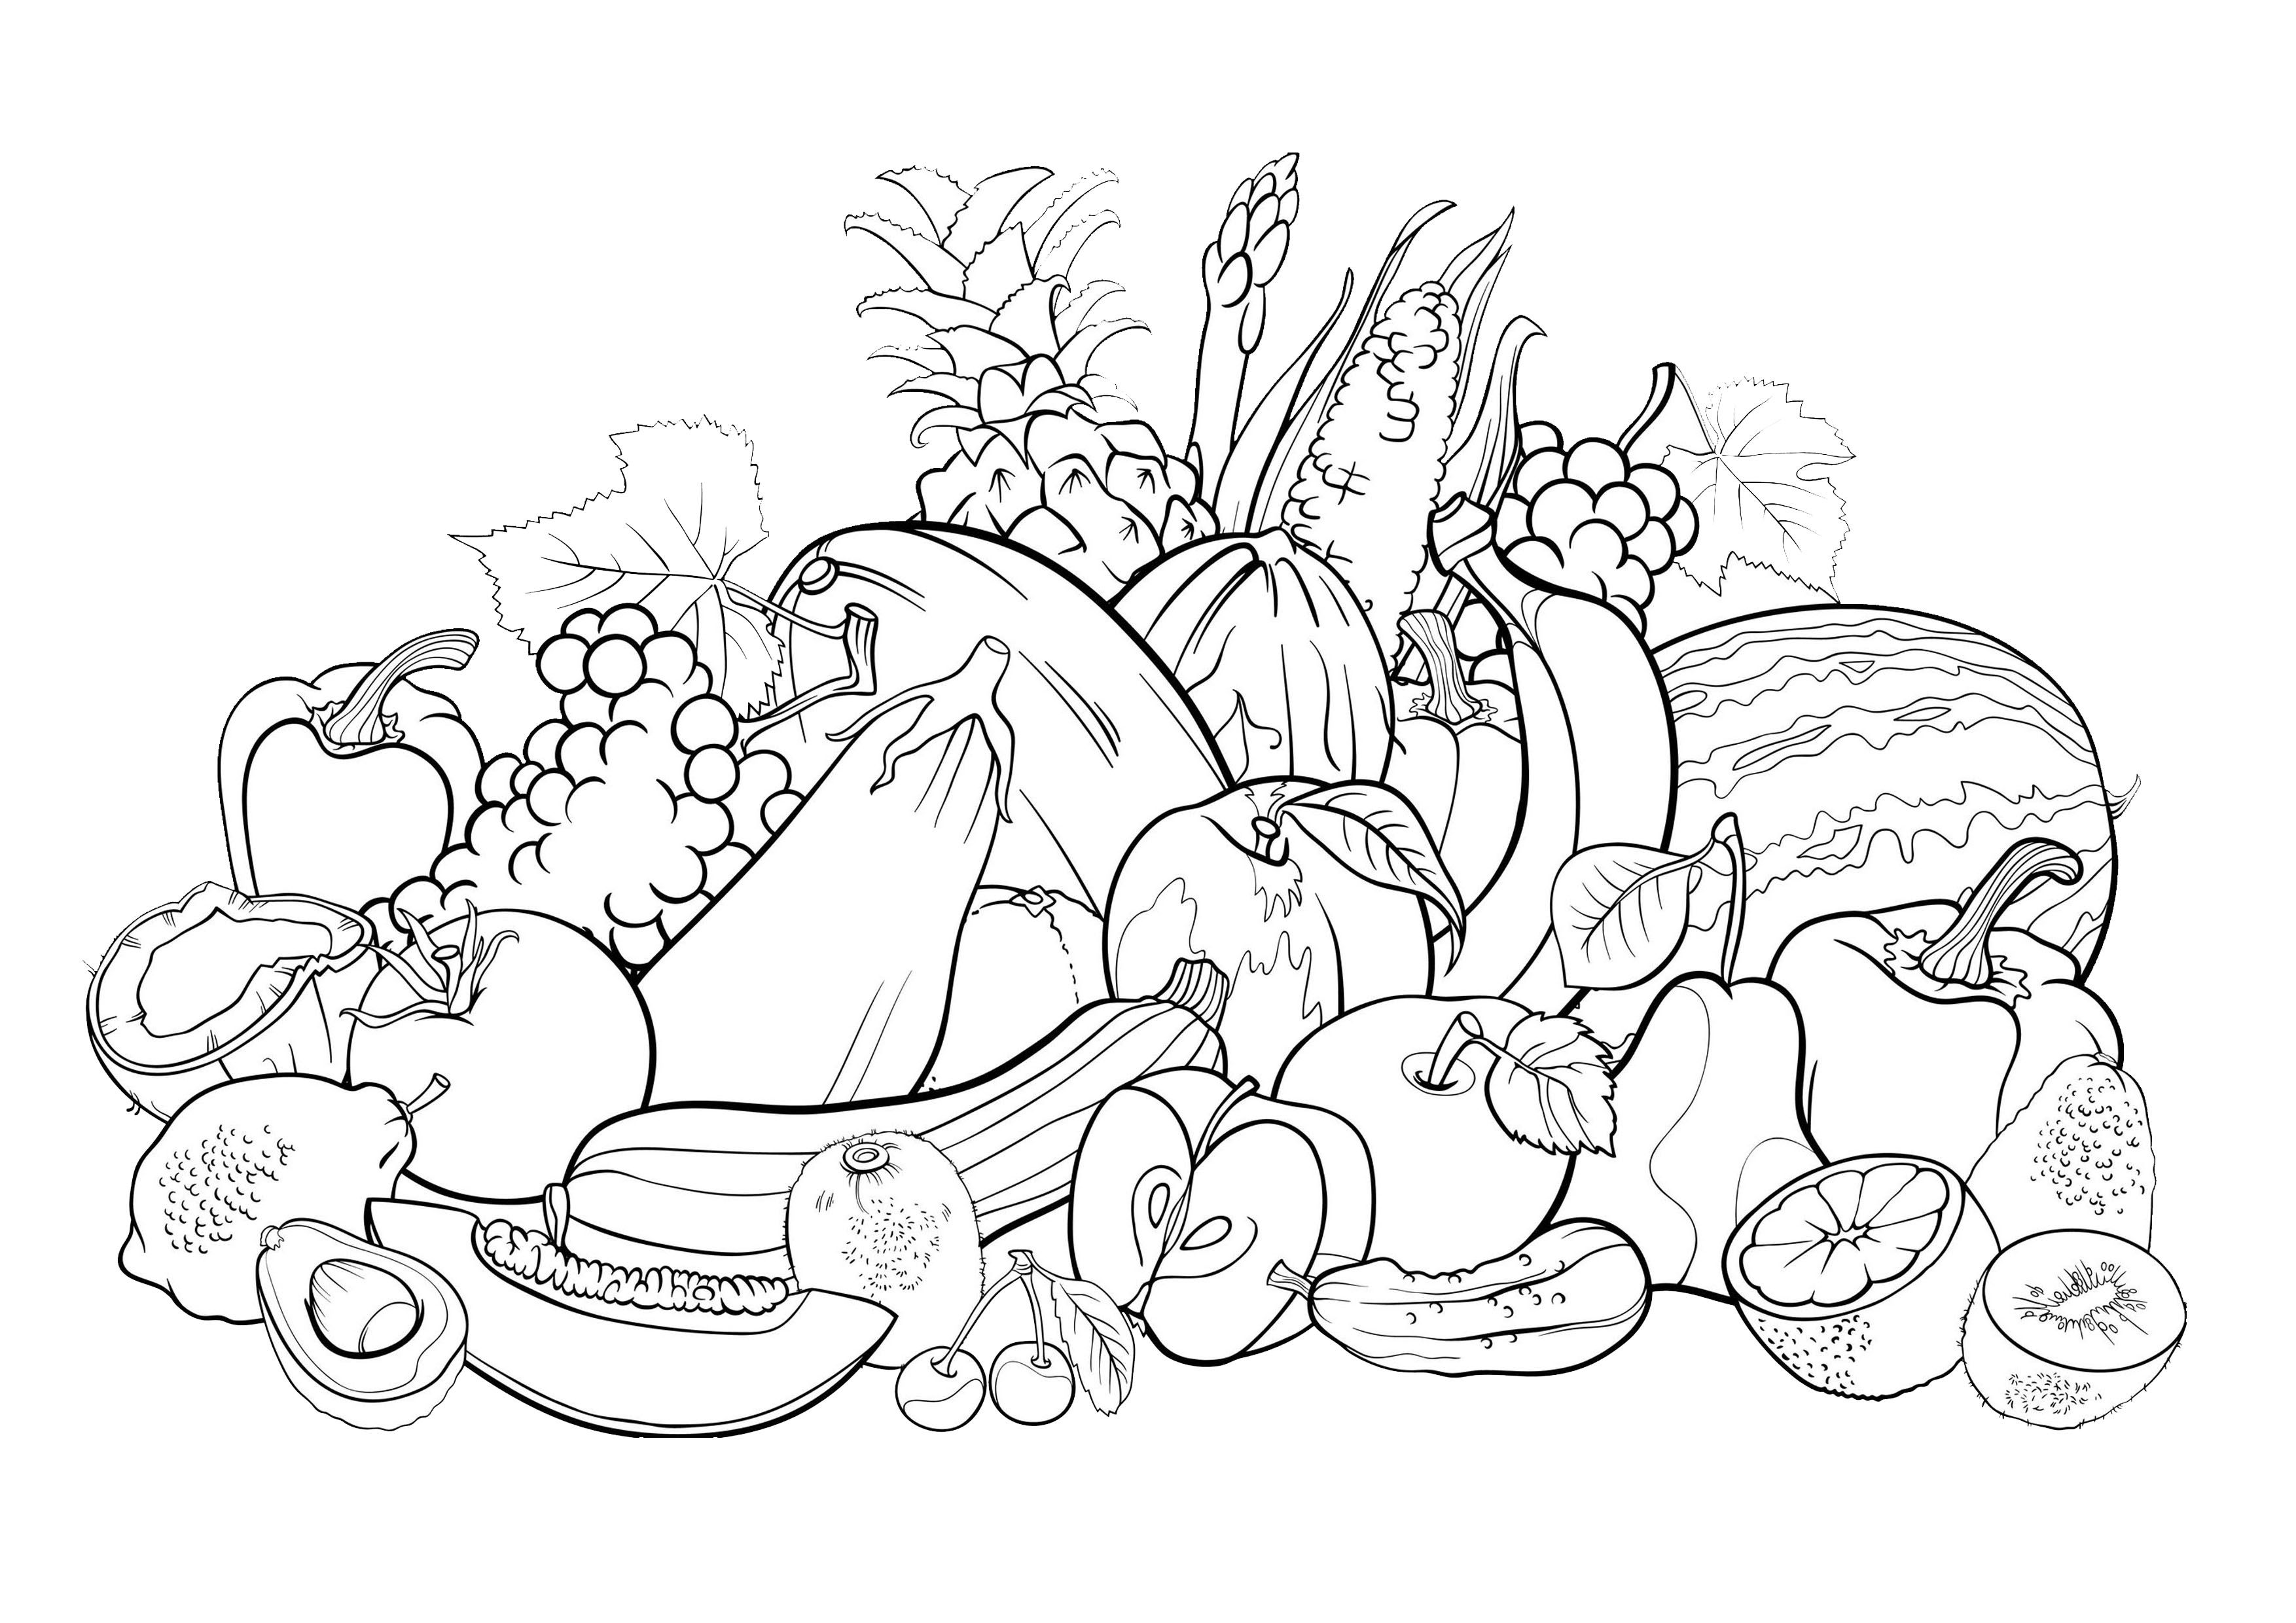 Flower and vegetation - | Coloring Pages For Adults